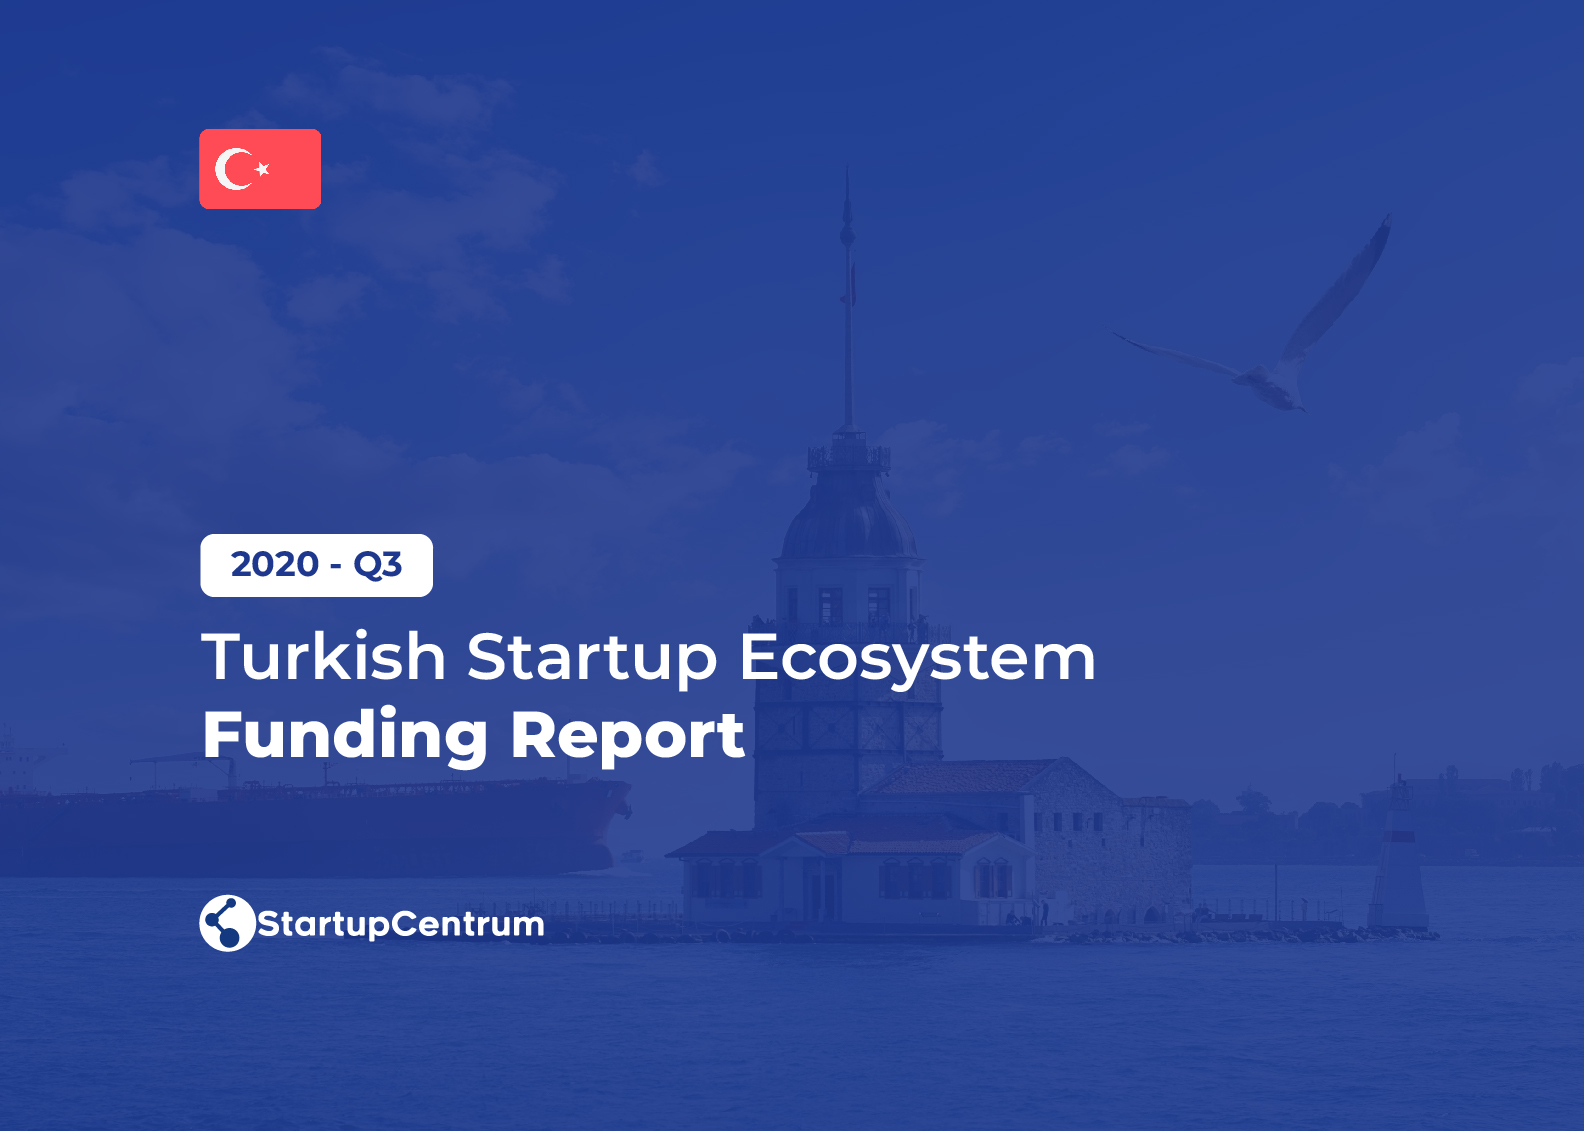 2020 - Q3 Turkish Startup Ecosystem Funding Report Cover Image